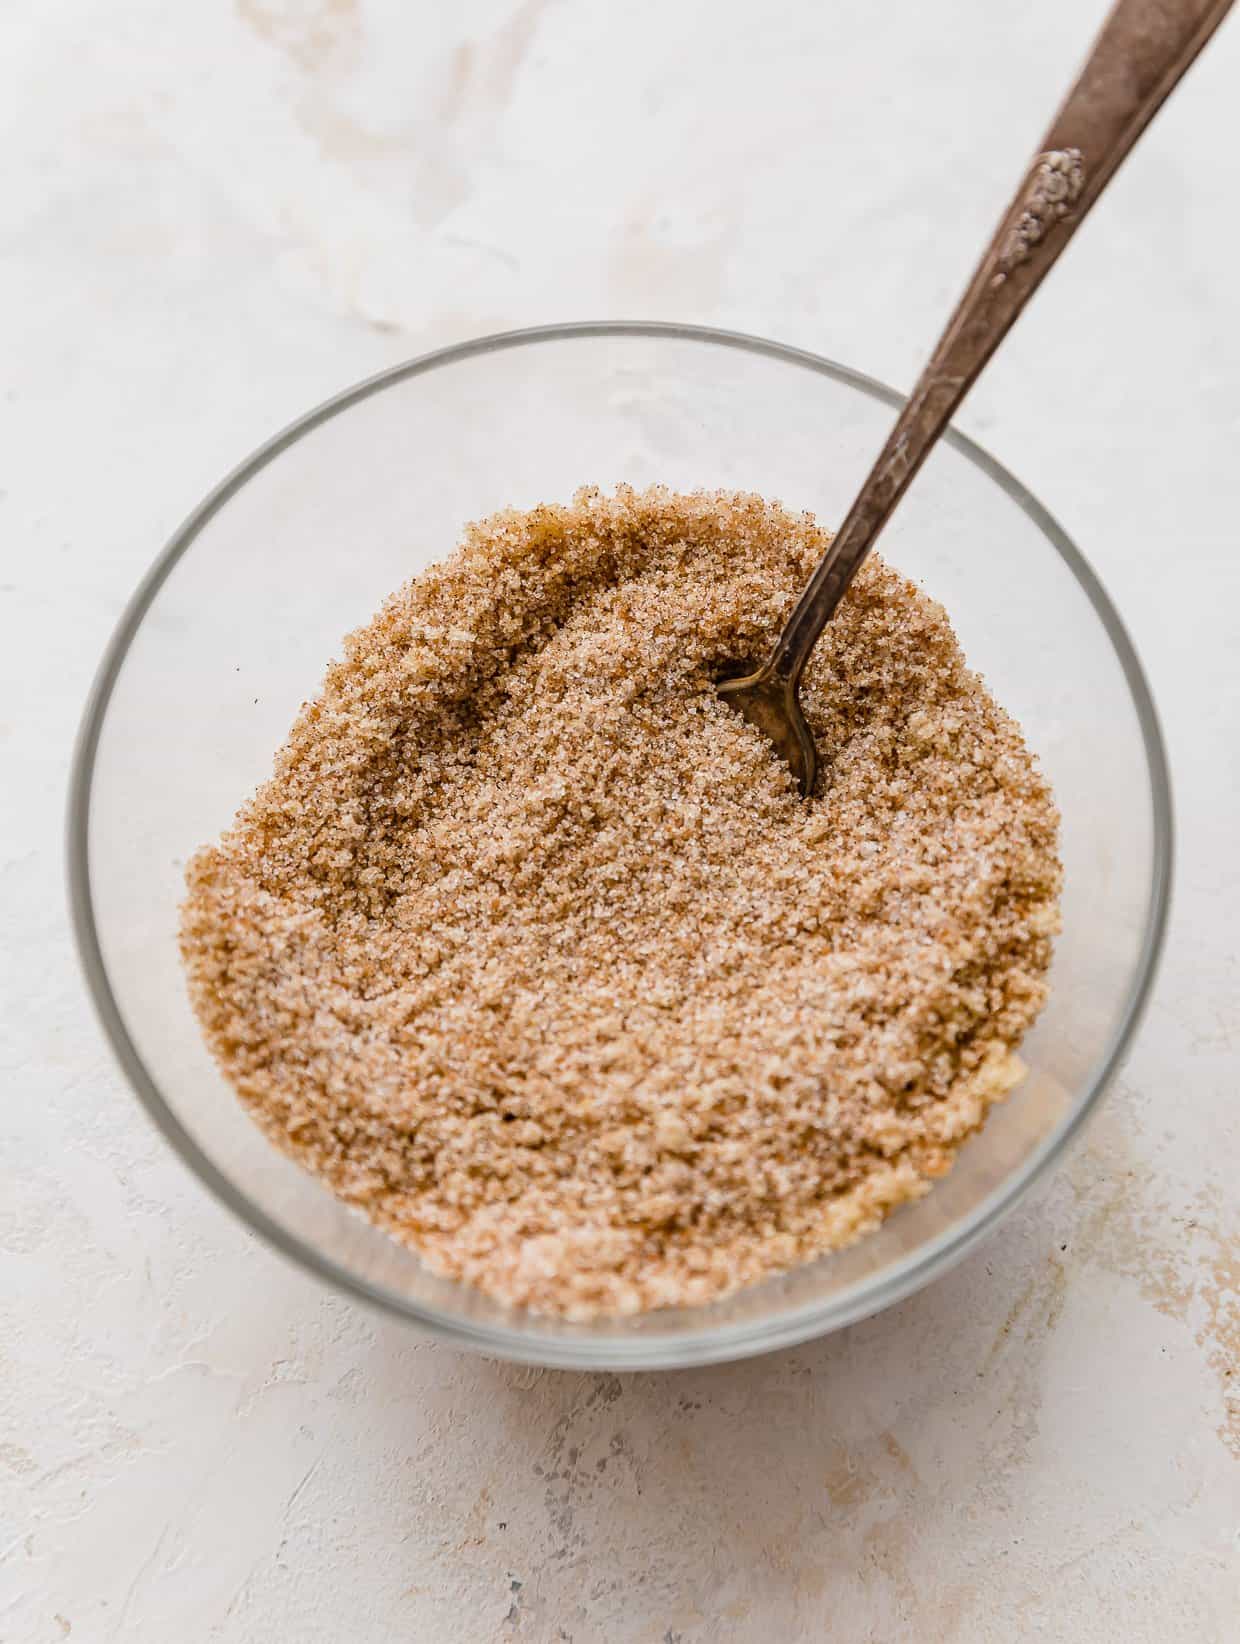 A cinnamon sugar mixture in a glass bowl on a white background.